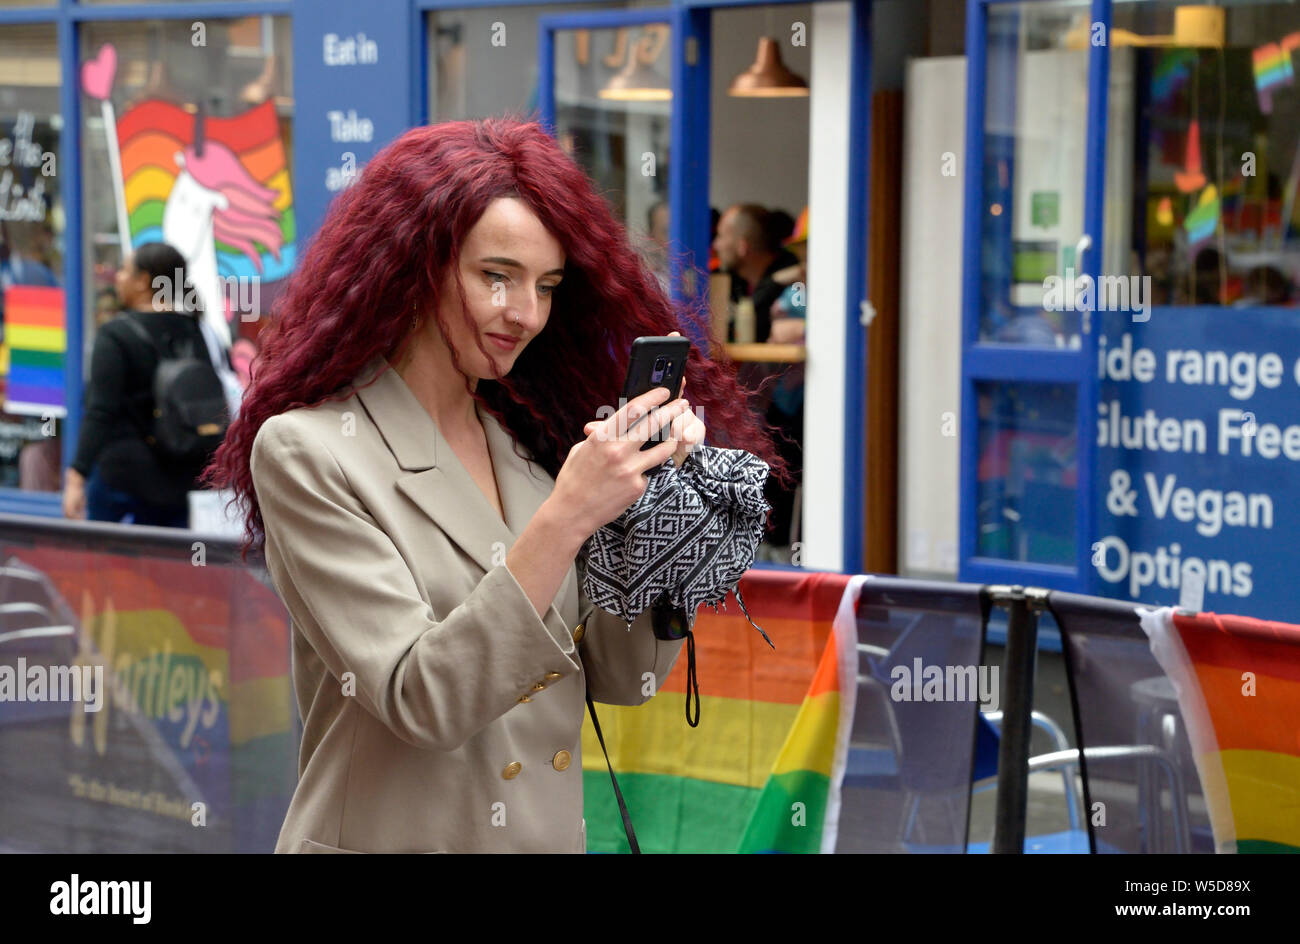 Lady with red hair, taking photographs at Pride, Nottingham. Stock Photo